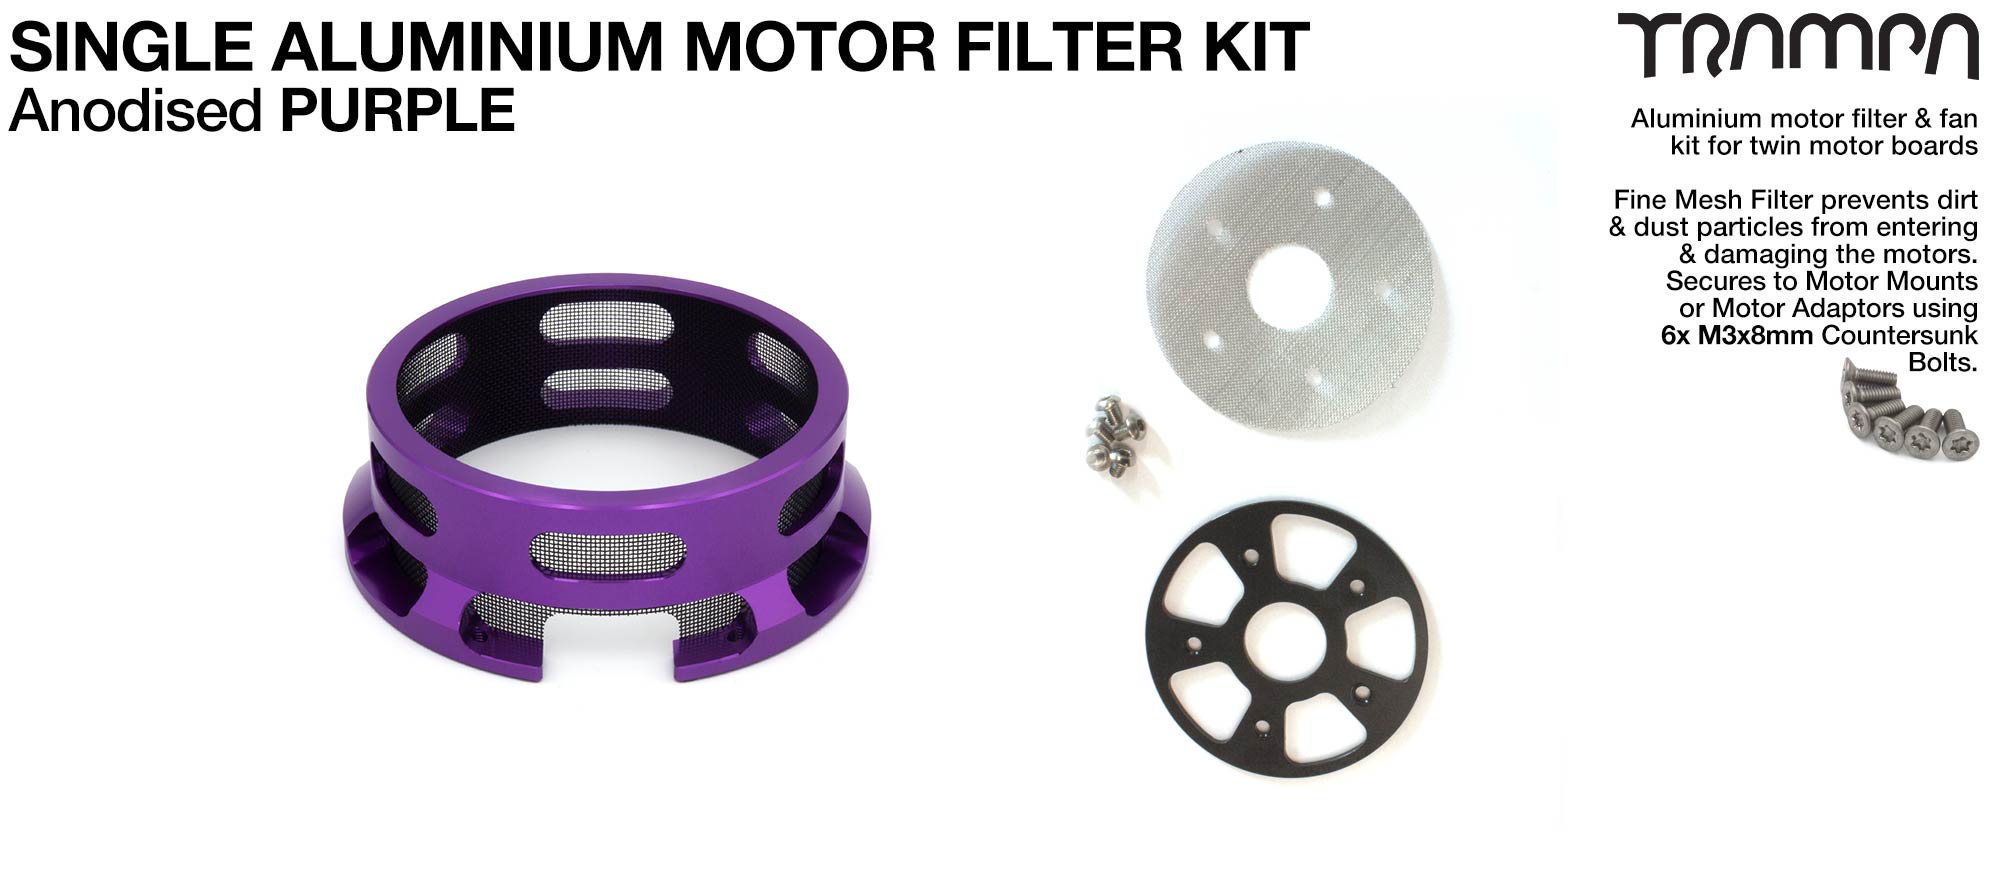 HALF CAGE Motor protection  - PURPLE anodised with Filters - SINGLE